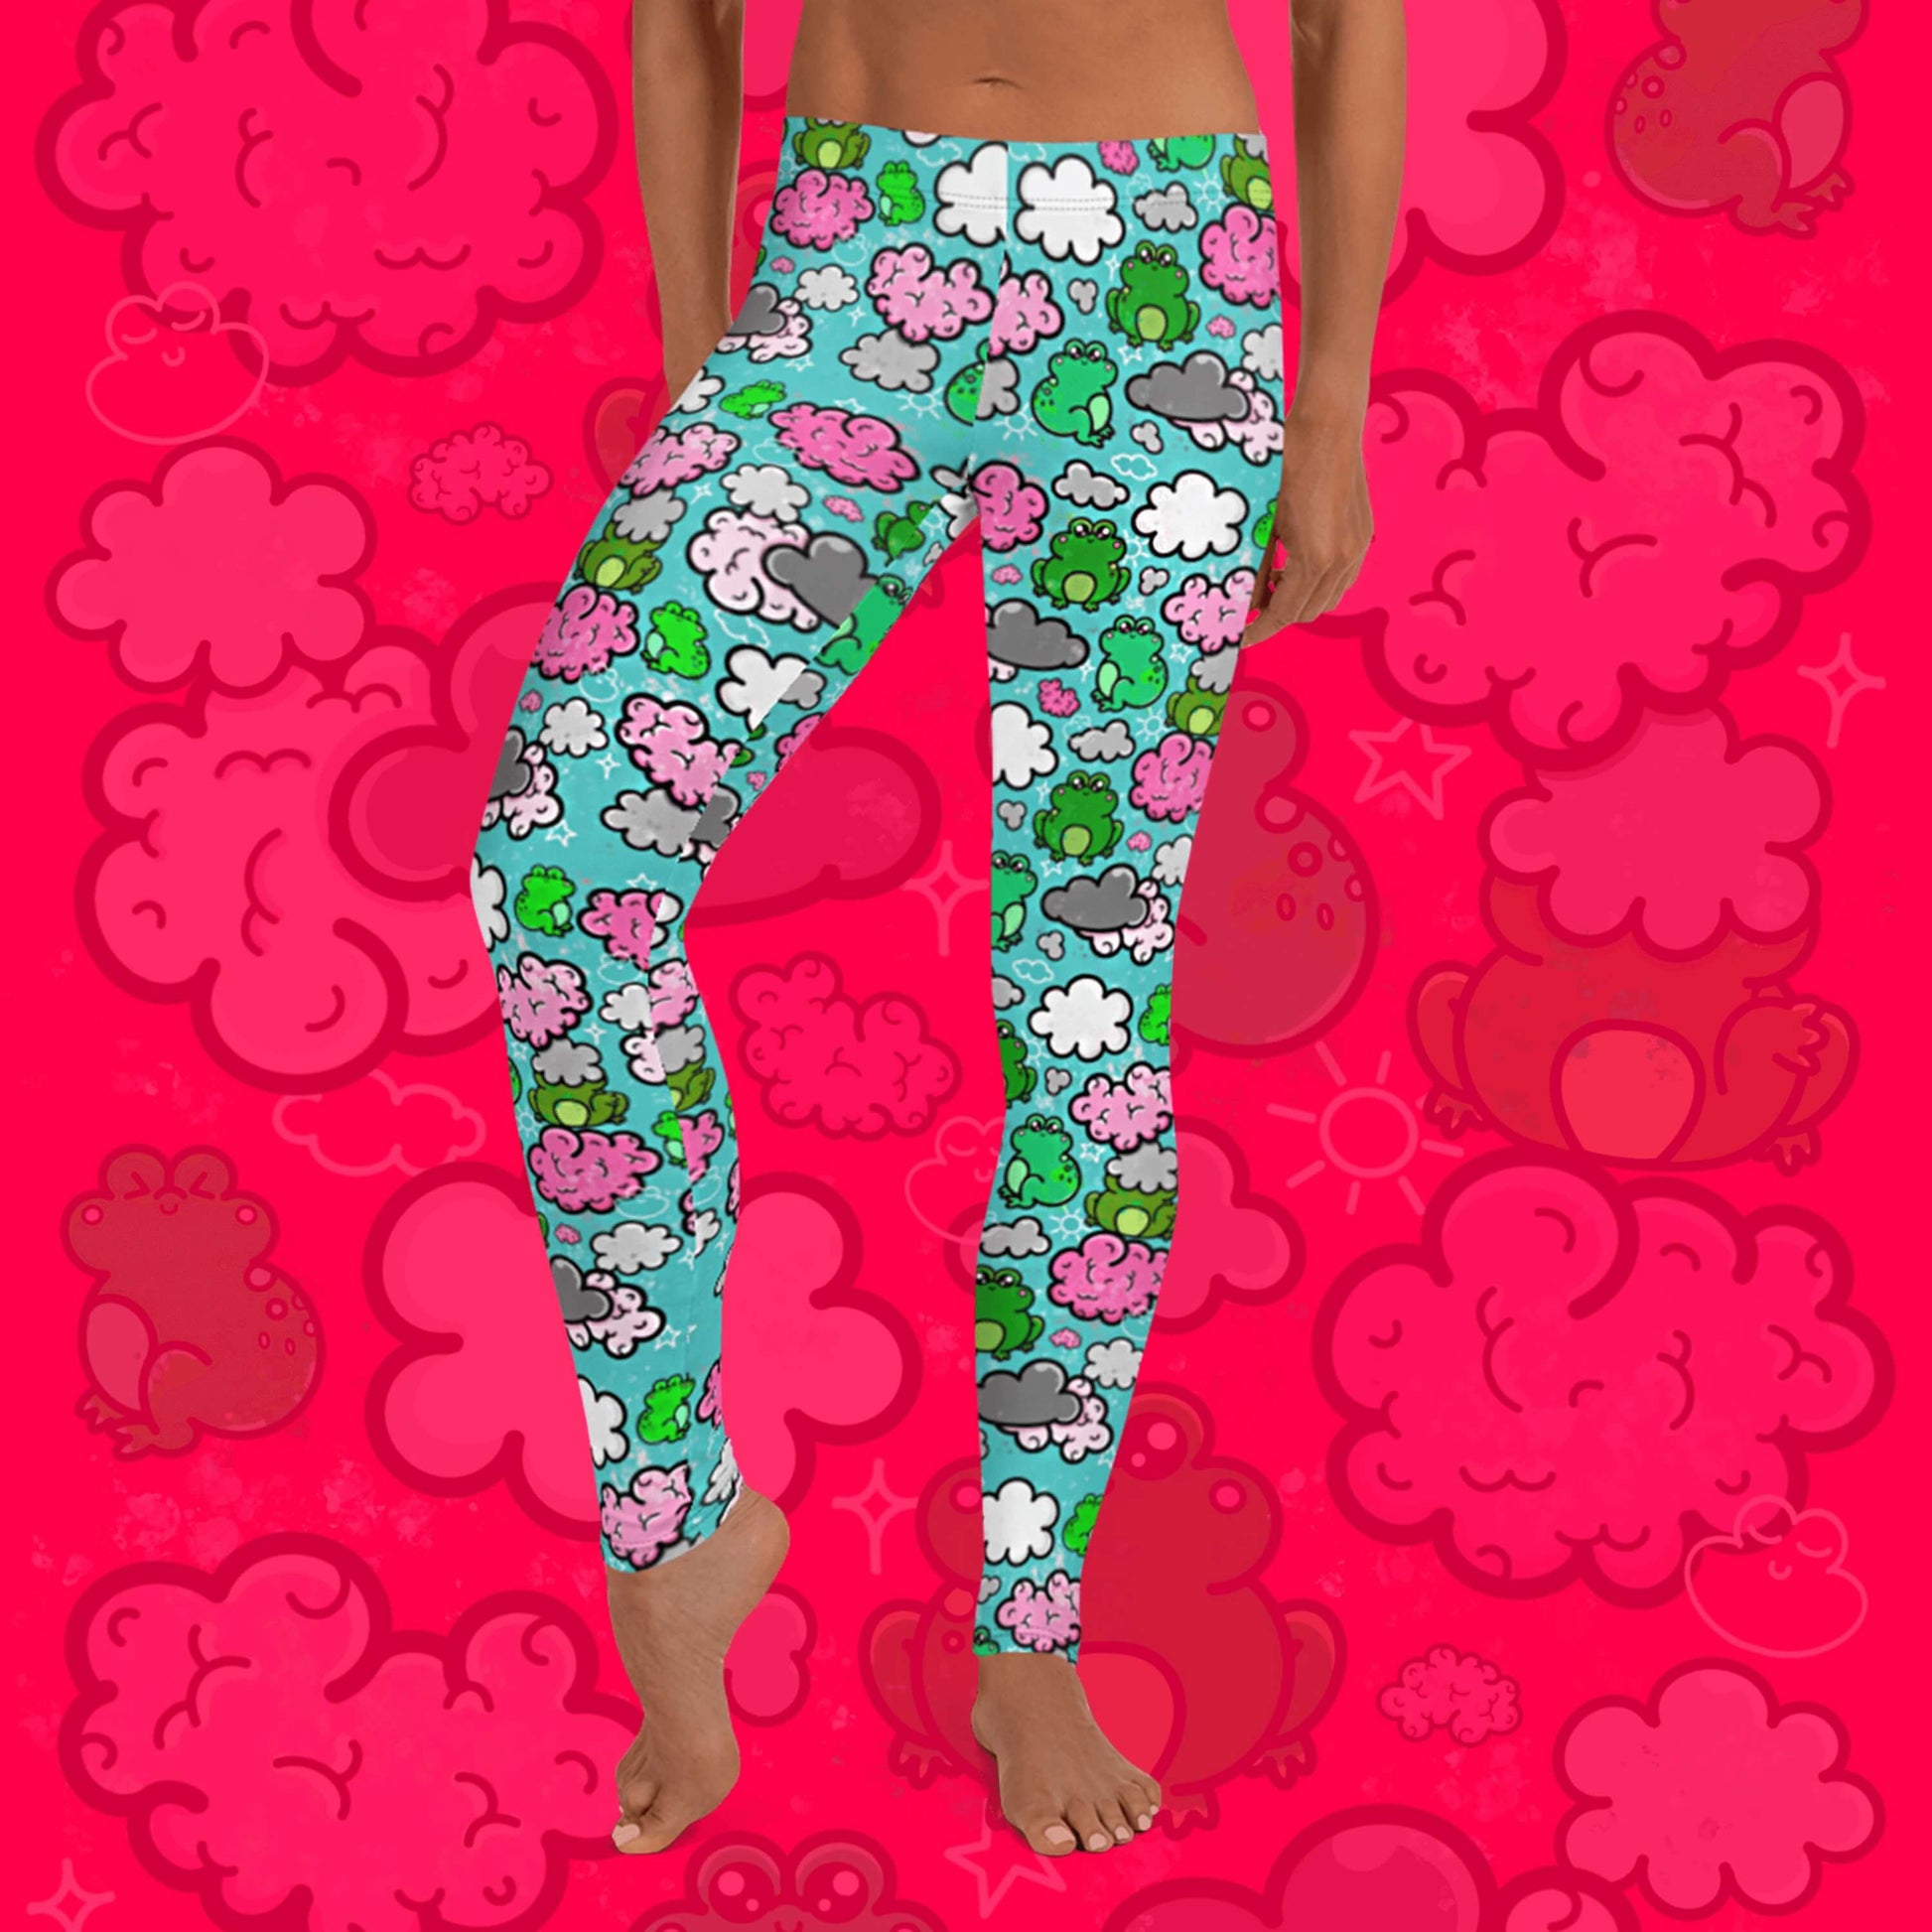 The Brain Frog Leggings - Brain Fog being worn by a model facing forward with their left leg bent on a red background with a faded brain frog print, the photo is cropped from the hips down. The leggings are an aqua blue base with various green kawaii face frogs with pink blush cheeks, pink brain style clouds, white and grey clouds and white sparkles all over. The design was created to raise awareness of Brain Fog.